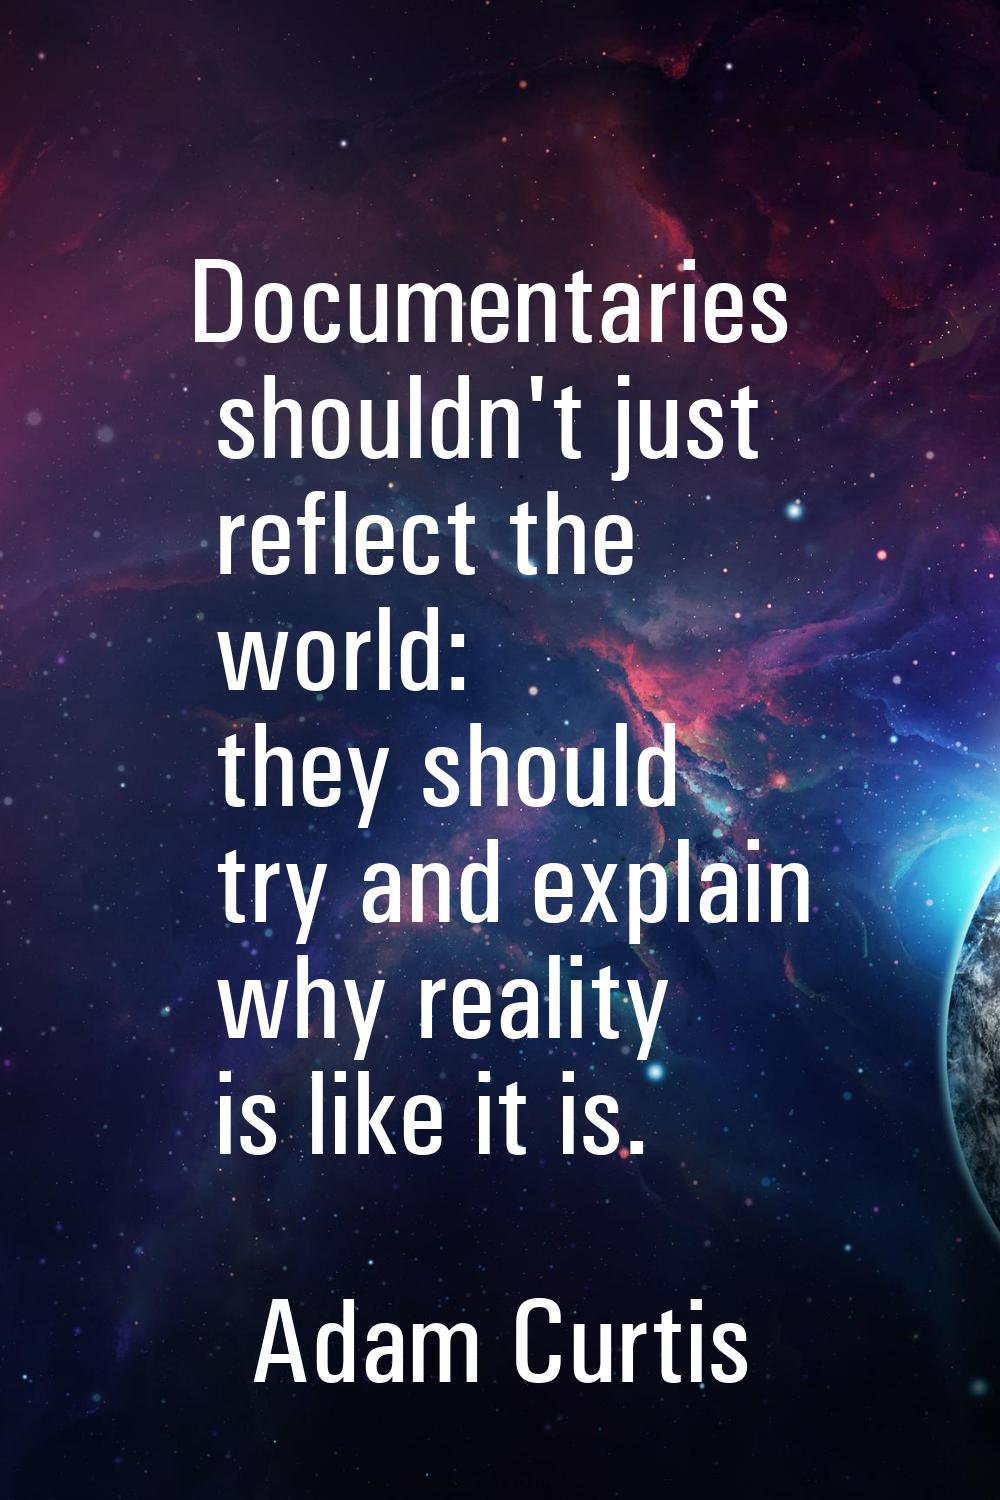 Documentaries shouldn't just reflect the world: they should try and explain why reality is like it 